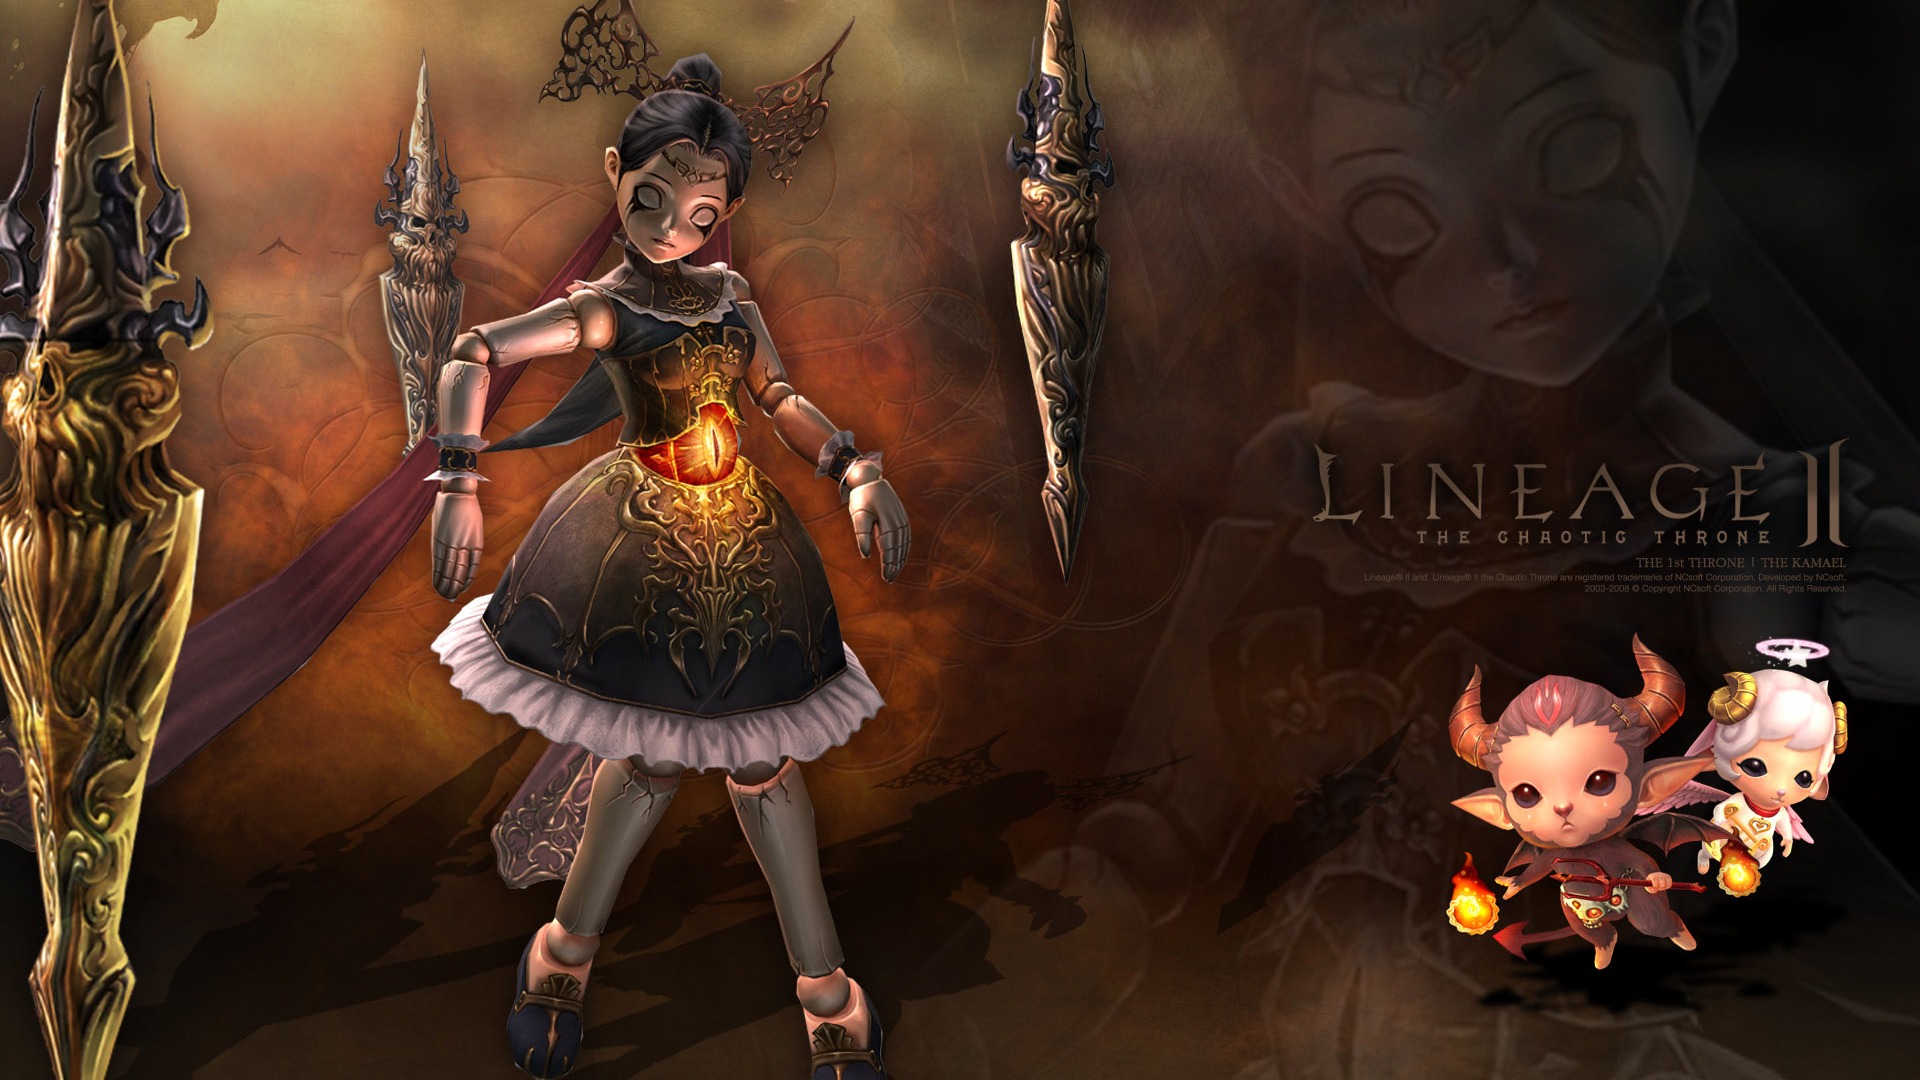 LINEAGE Ⅱ Modellierung HD-Gaming-Wallpaper #19 - 1920x1080